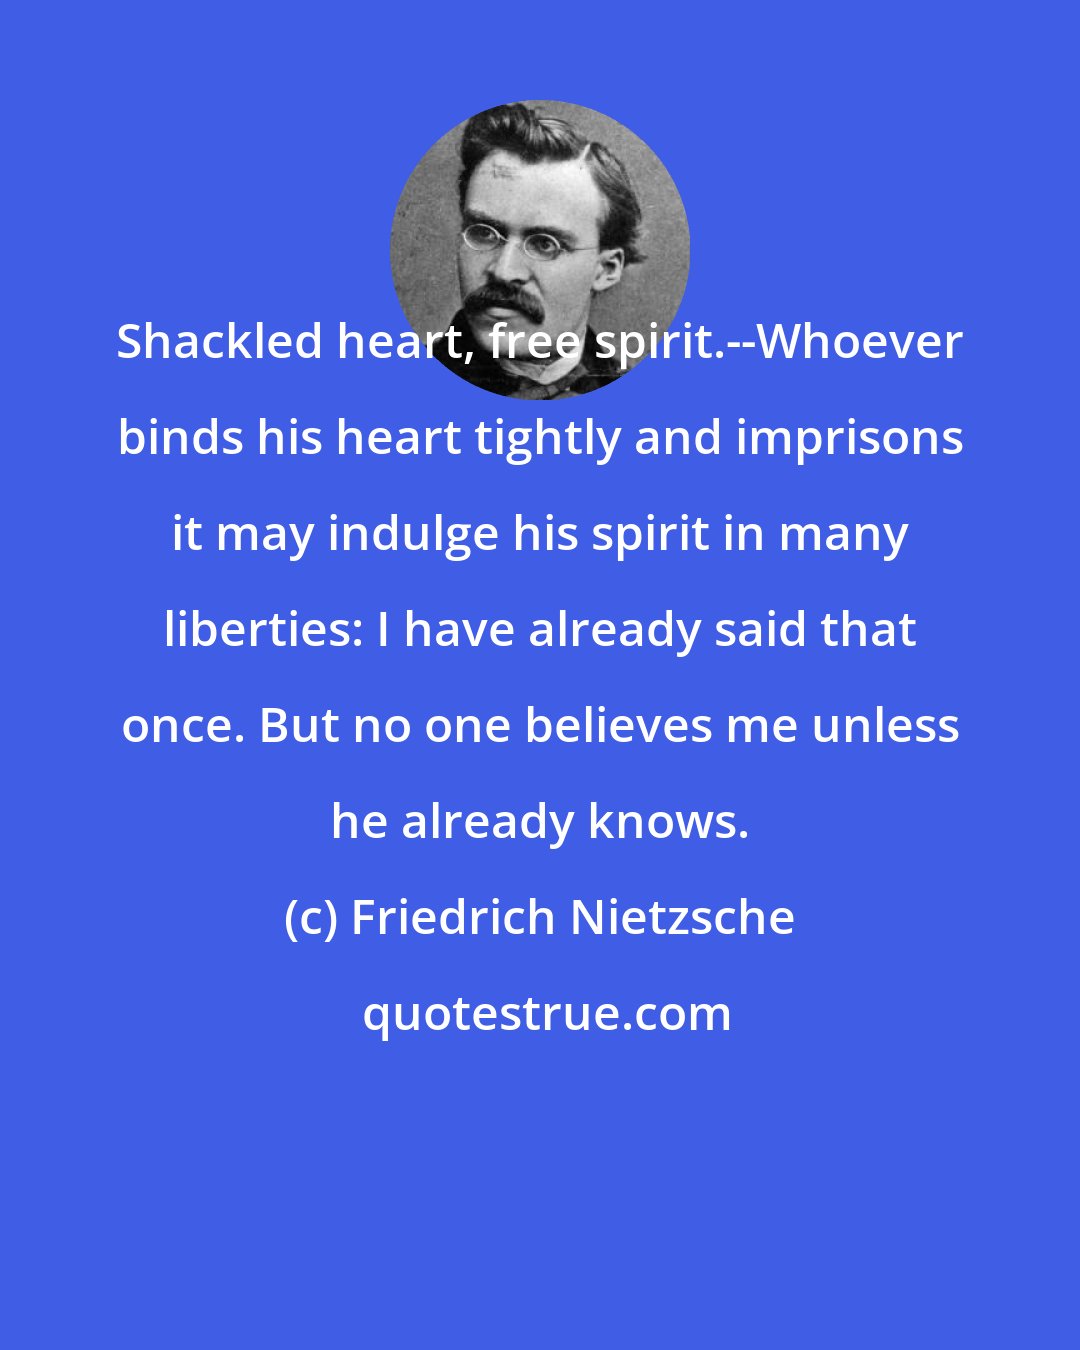 Friedrich Nietzsche: Shackled heart, free spirit.--Whoever binds his heart tightly and imprisons it may indulge his spirit in many liberties: I have already said that once. But no one believes me unless he already knows.